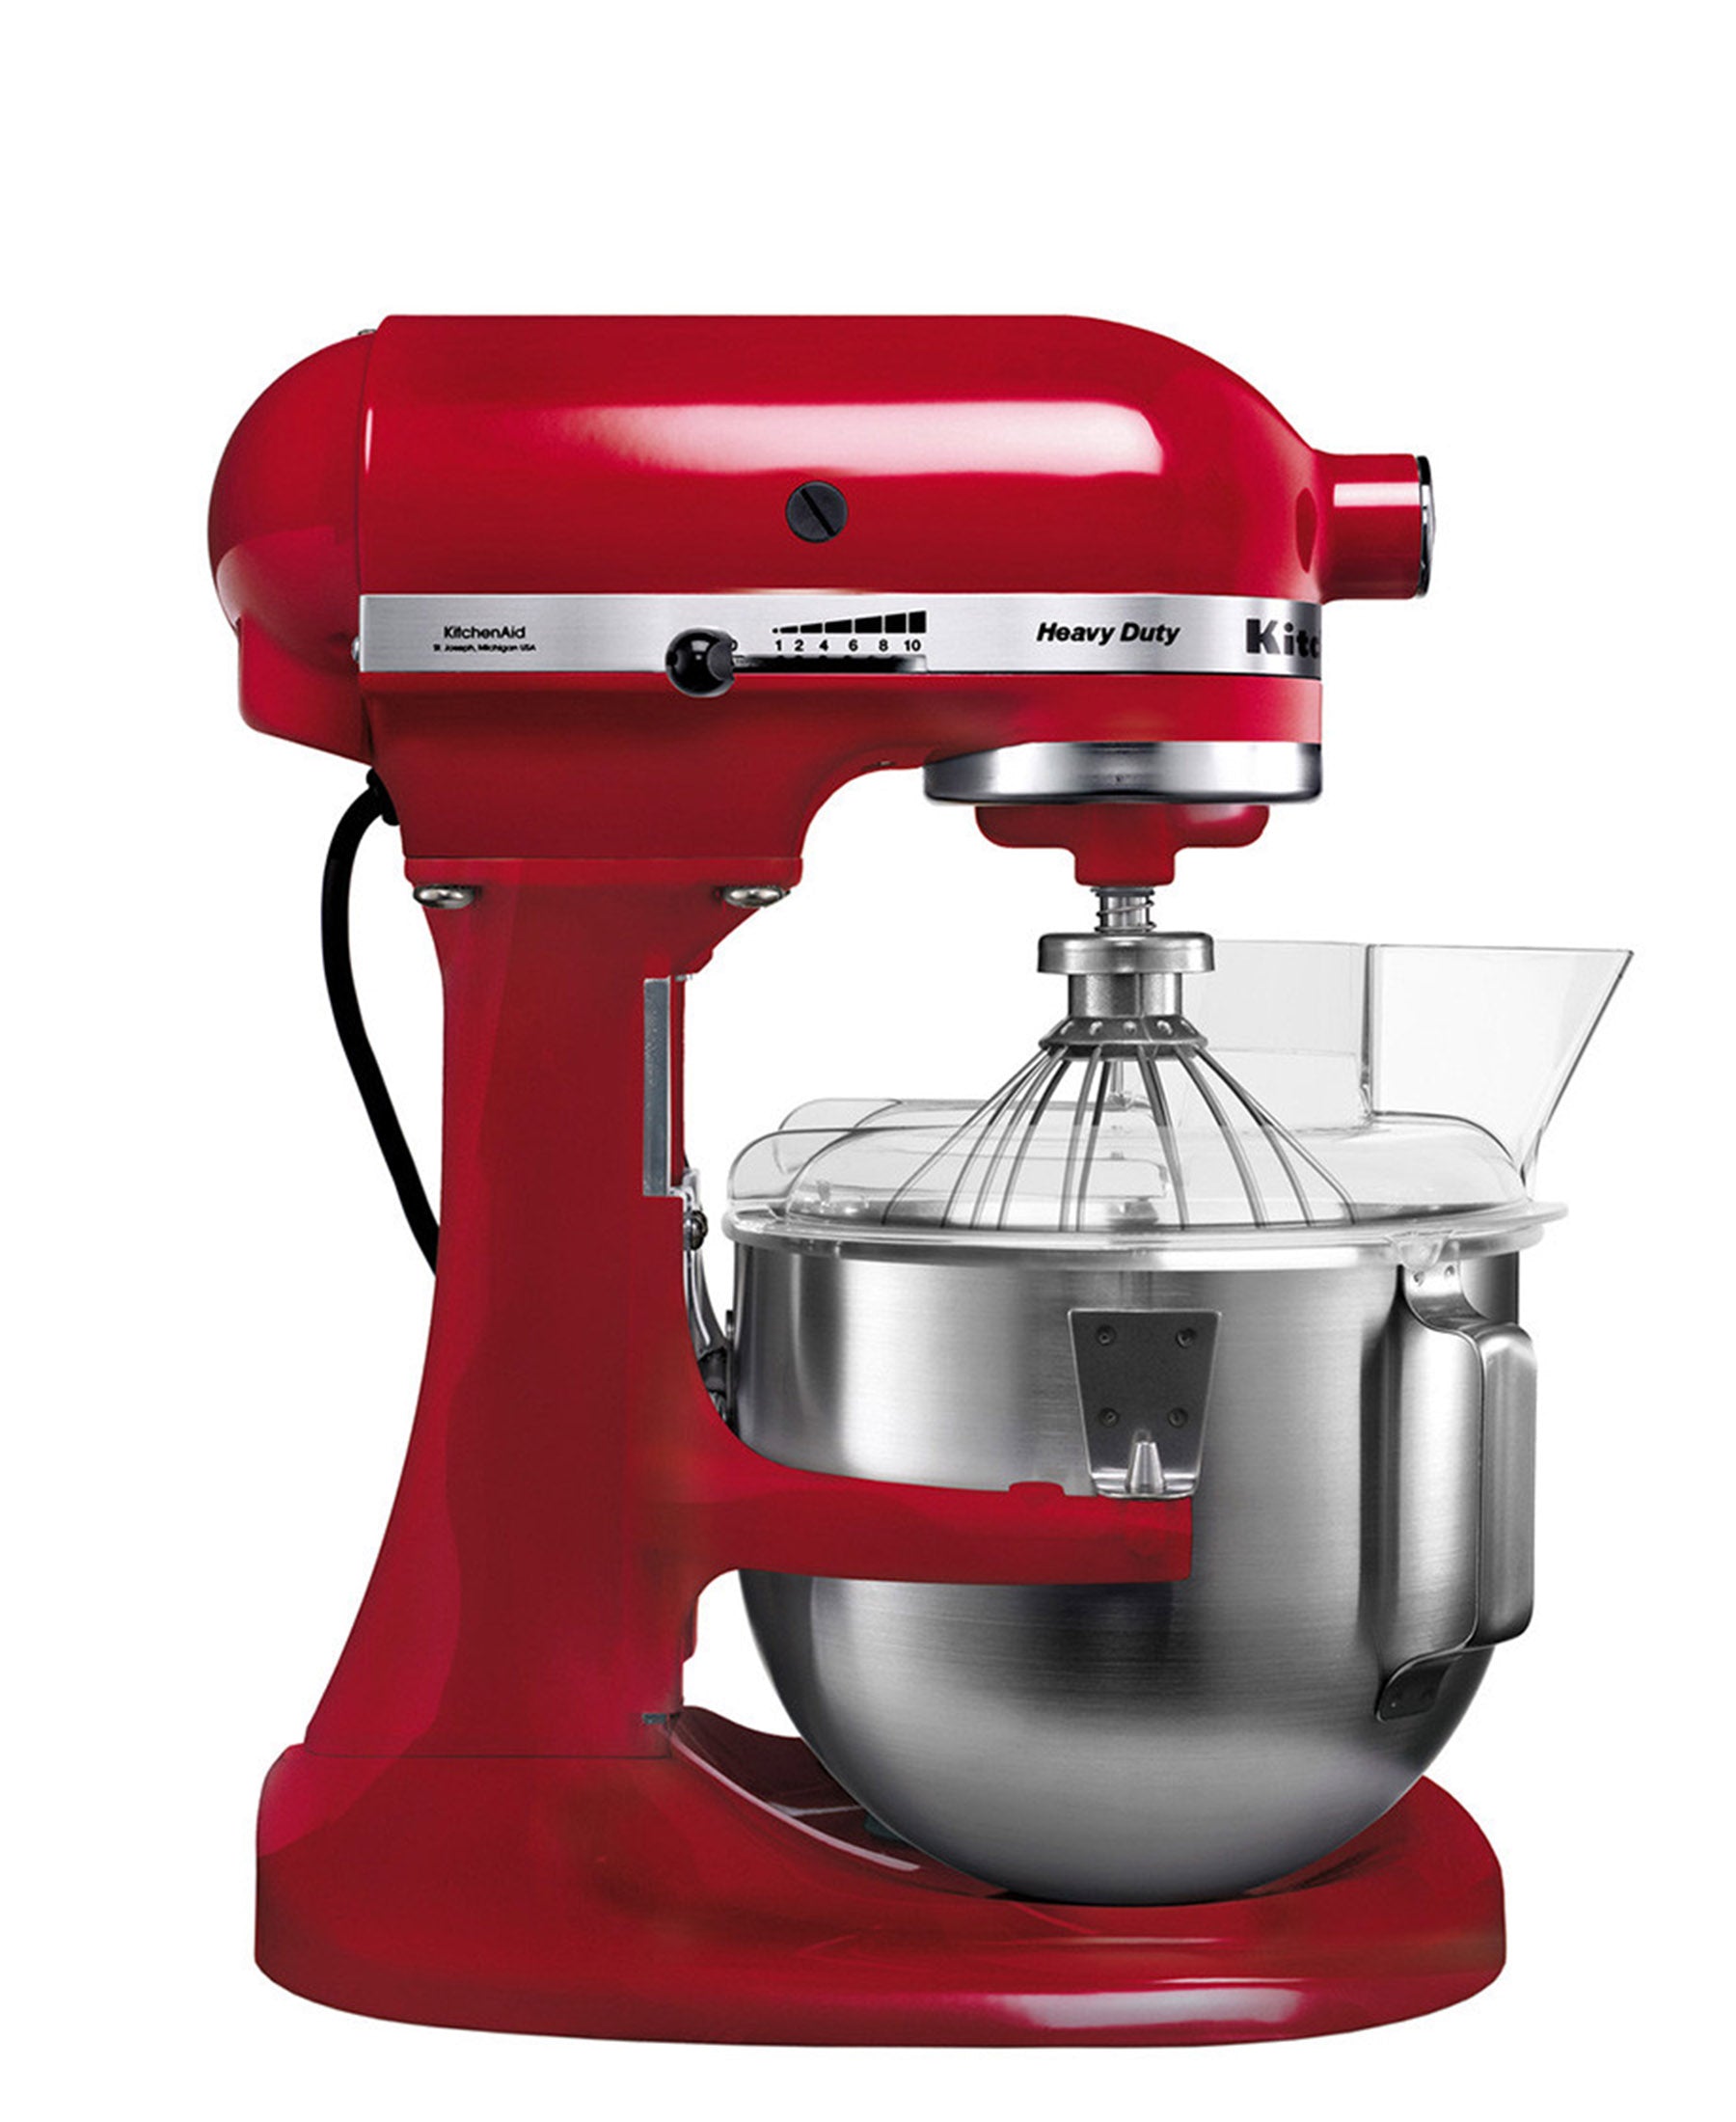 KitchenAid Heavy Duty 4.8L Stand Mixer - Empire Red Plus Free Stainless Steel Bowl & 2 Covers